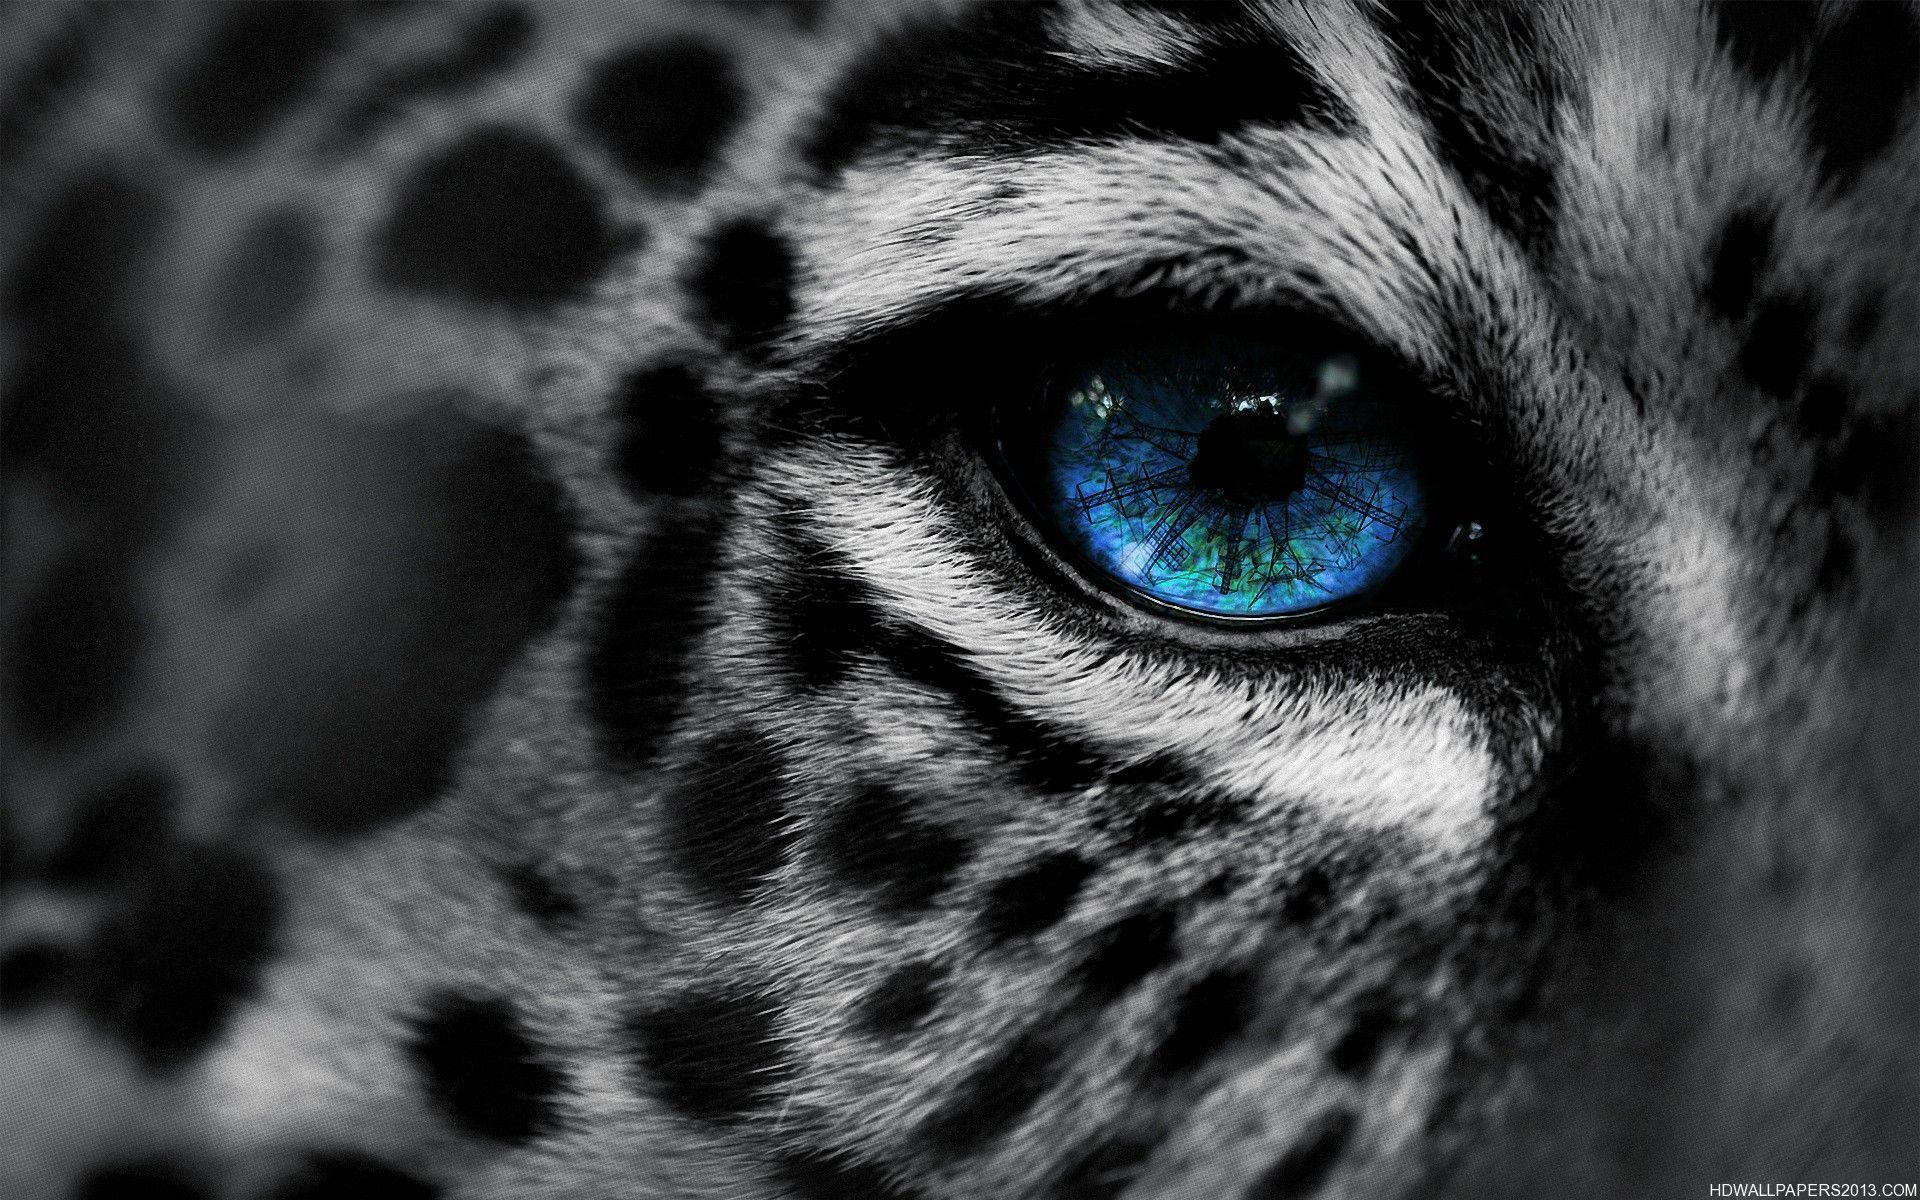 Eye of The Tiger. High Definition Wallpaper, High Definition